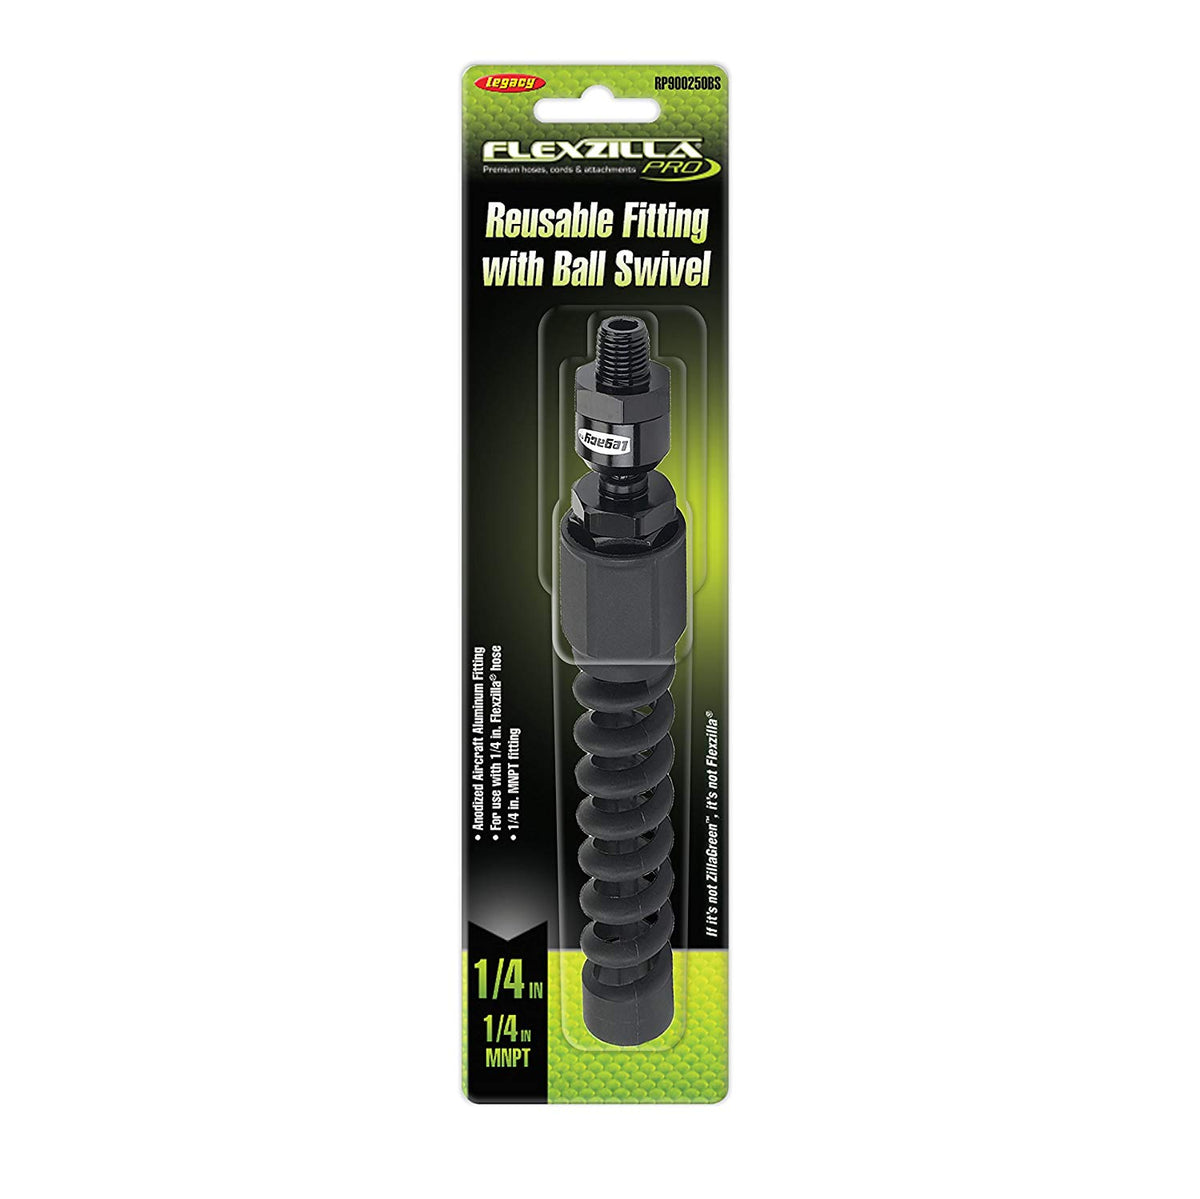 Flexzilla Pro RP900375BS Air Hose Reusable Fitting with Ball Swivel, 3/8", 1/4" MNPT